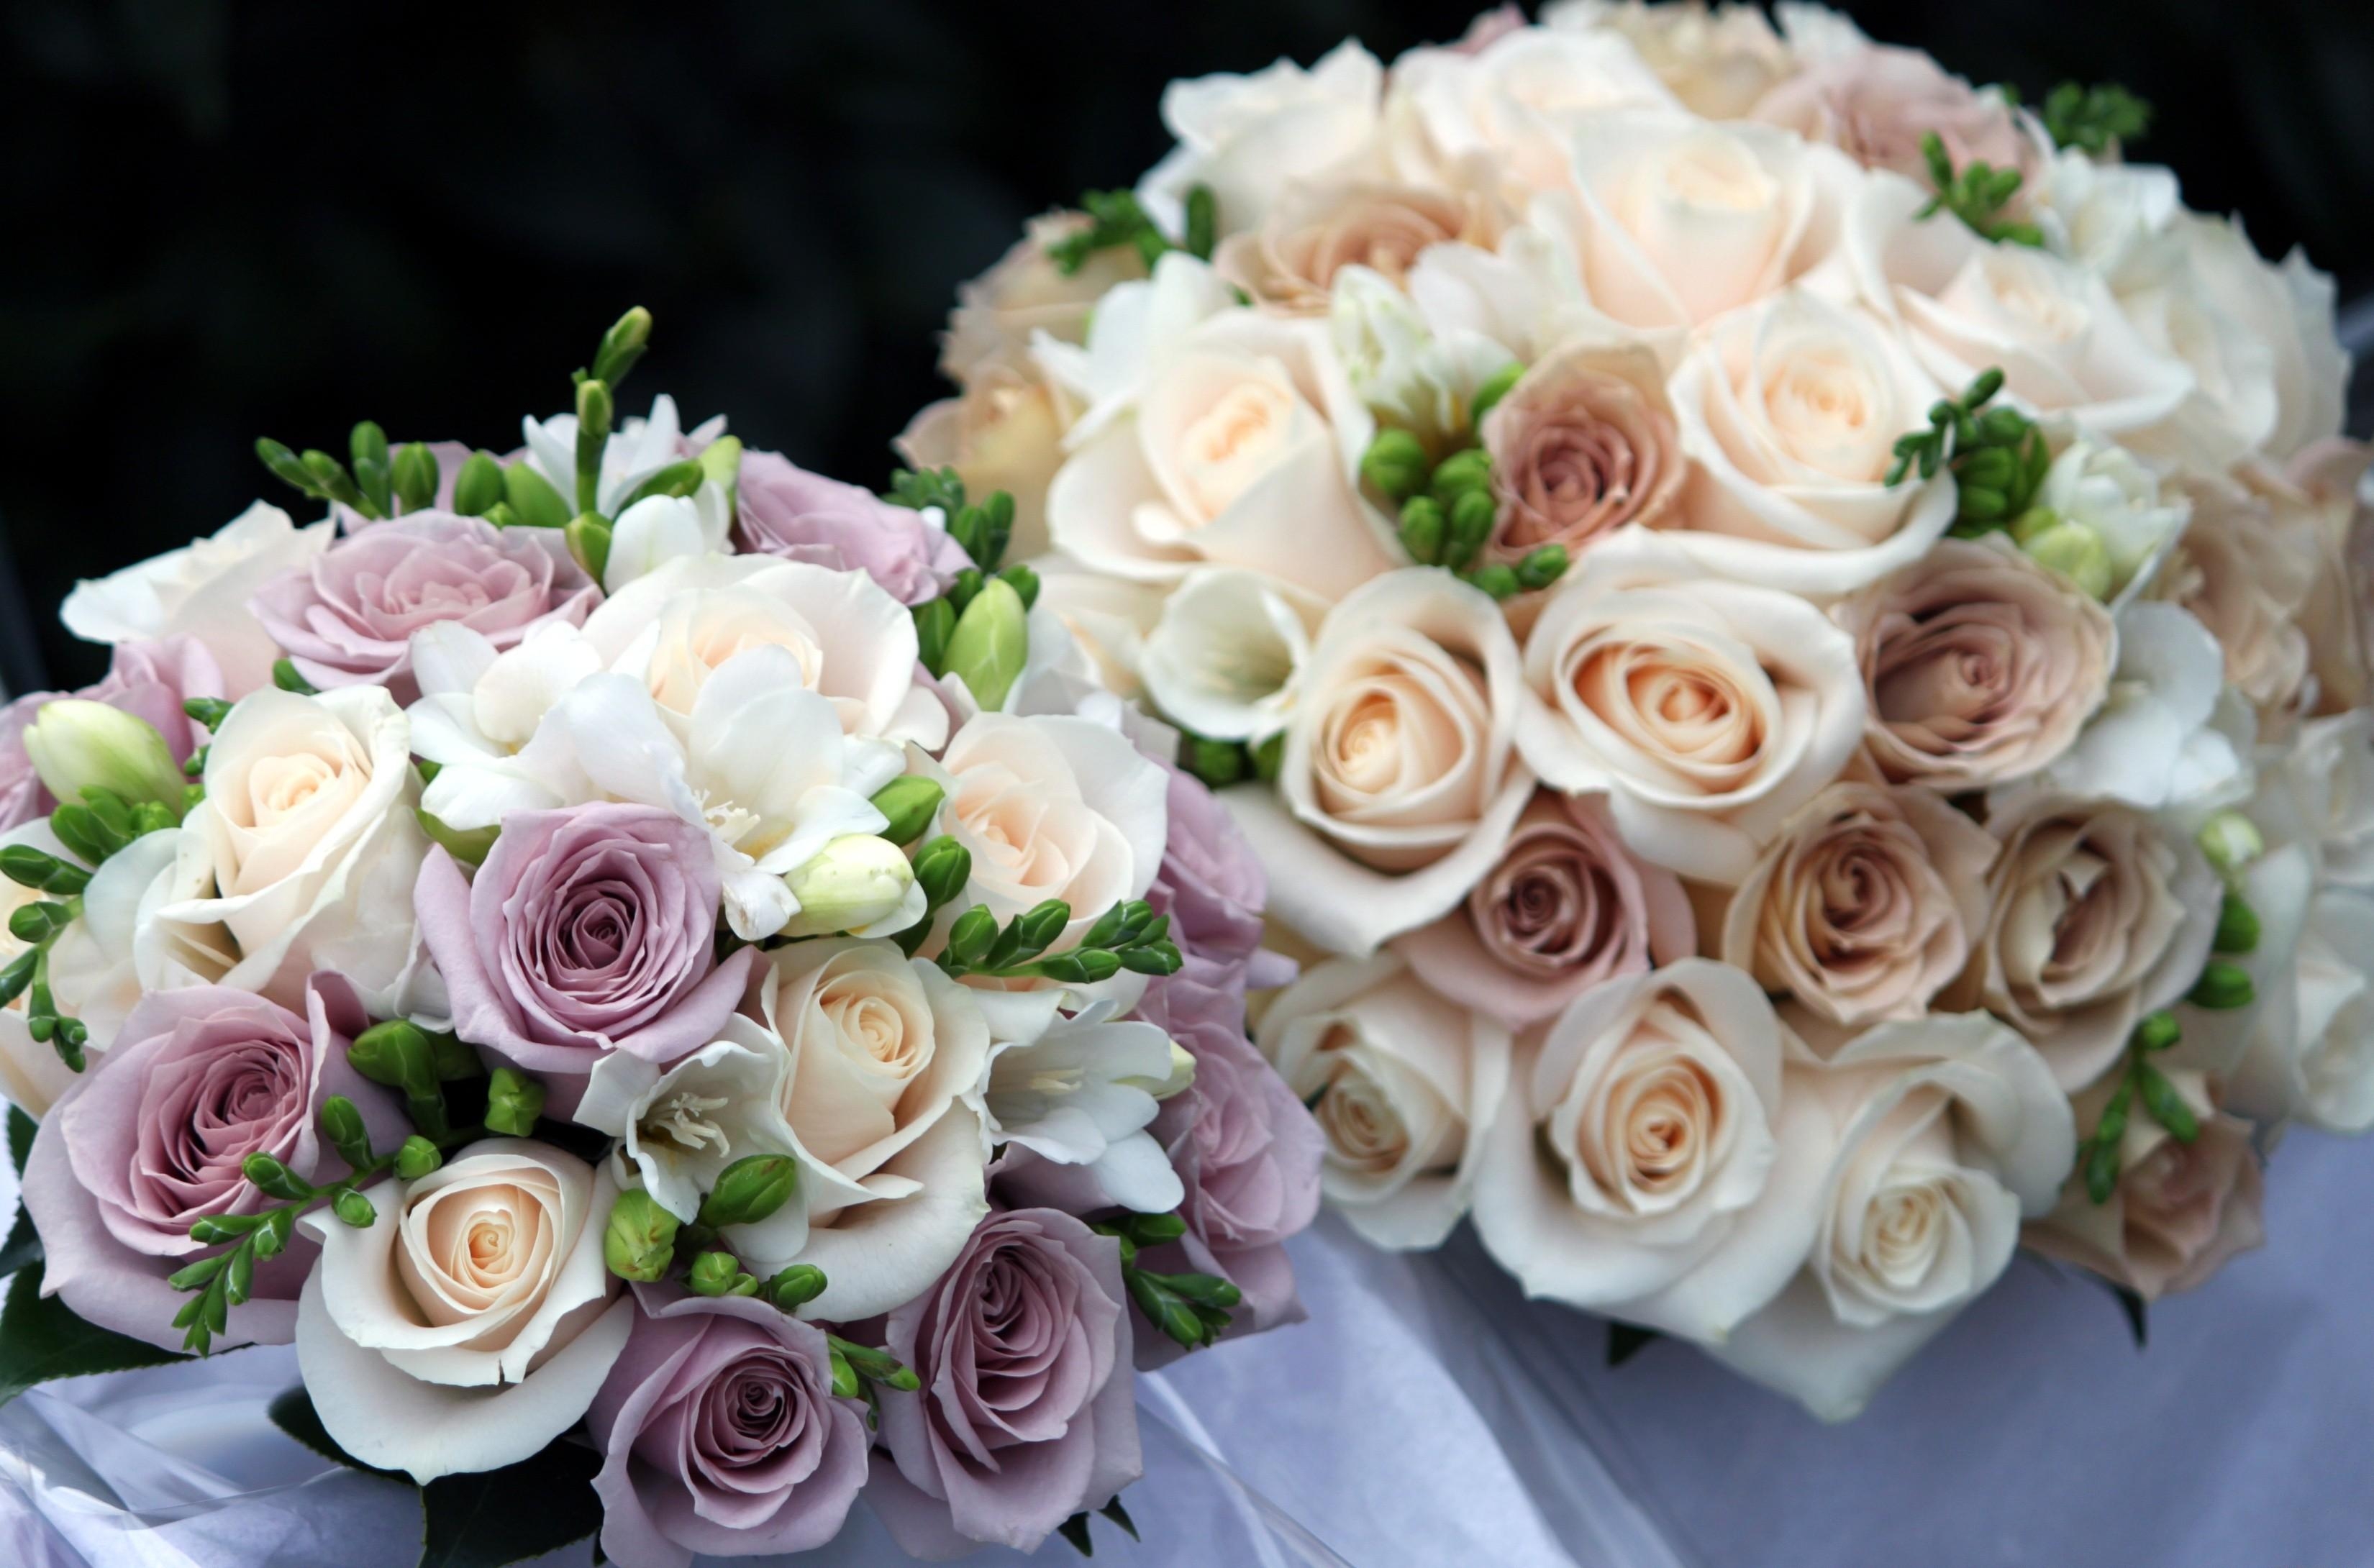 flowers, roses, beauty, bridal bouquets, wedding bouquets Phone Background